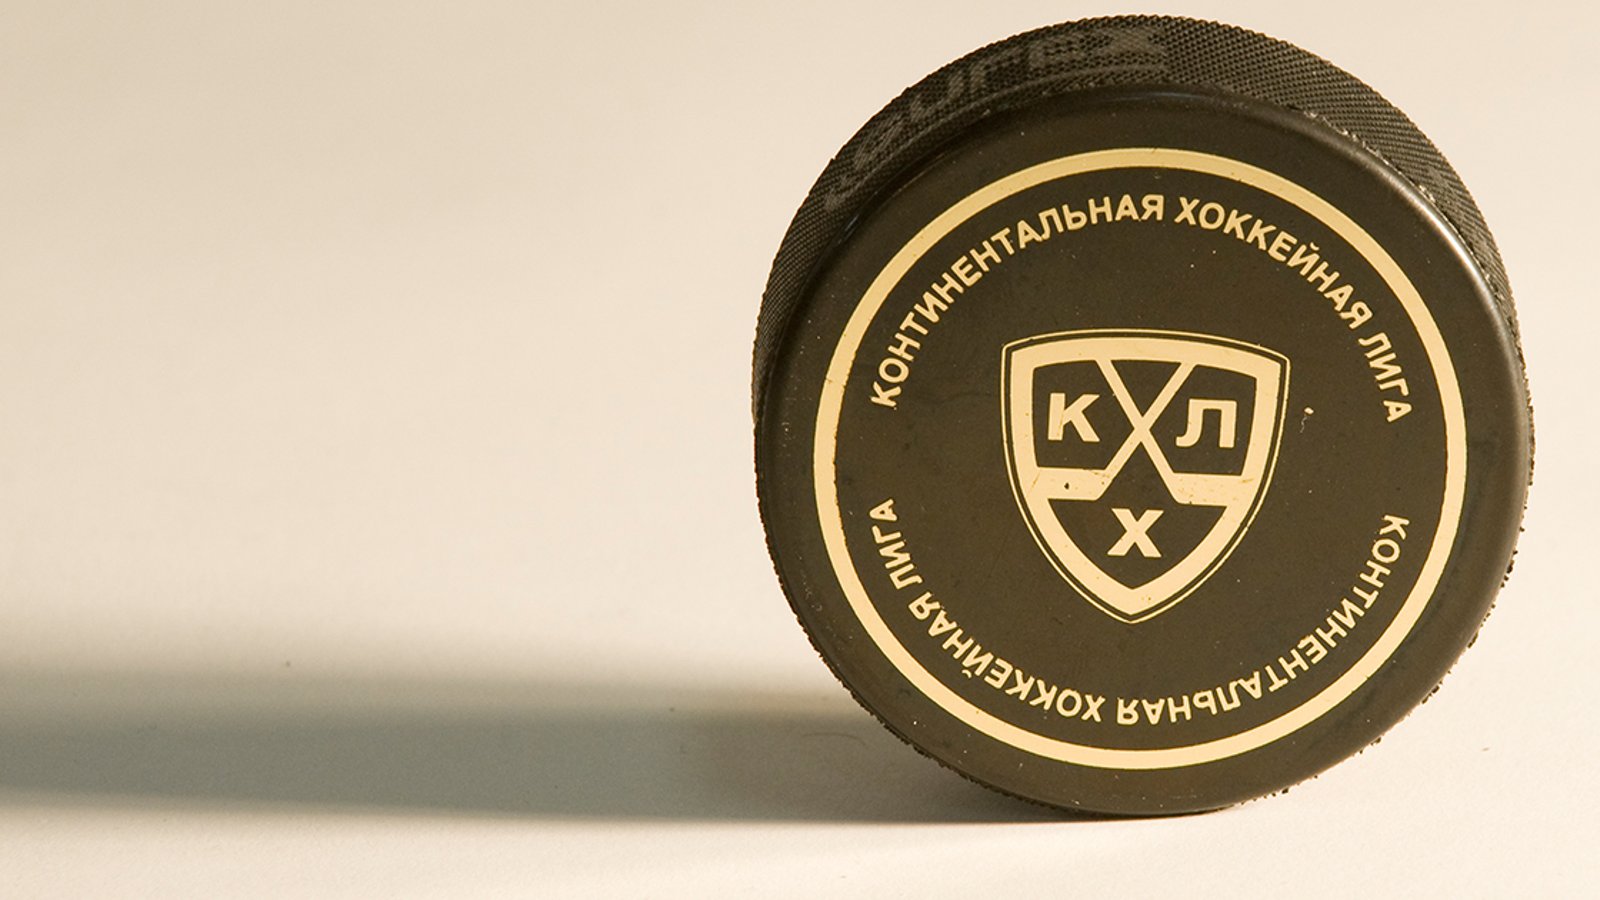 Report: 1st overall pick admits he turned down offer from KHL